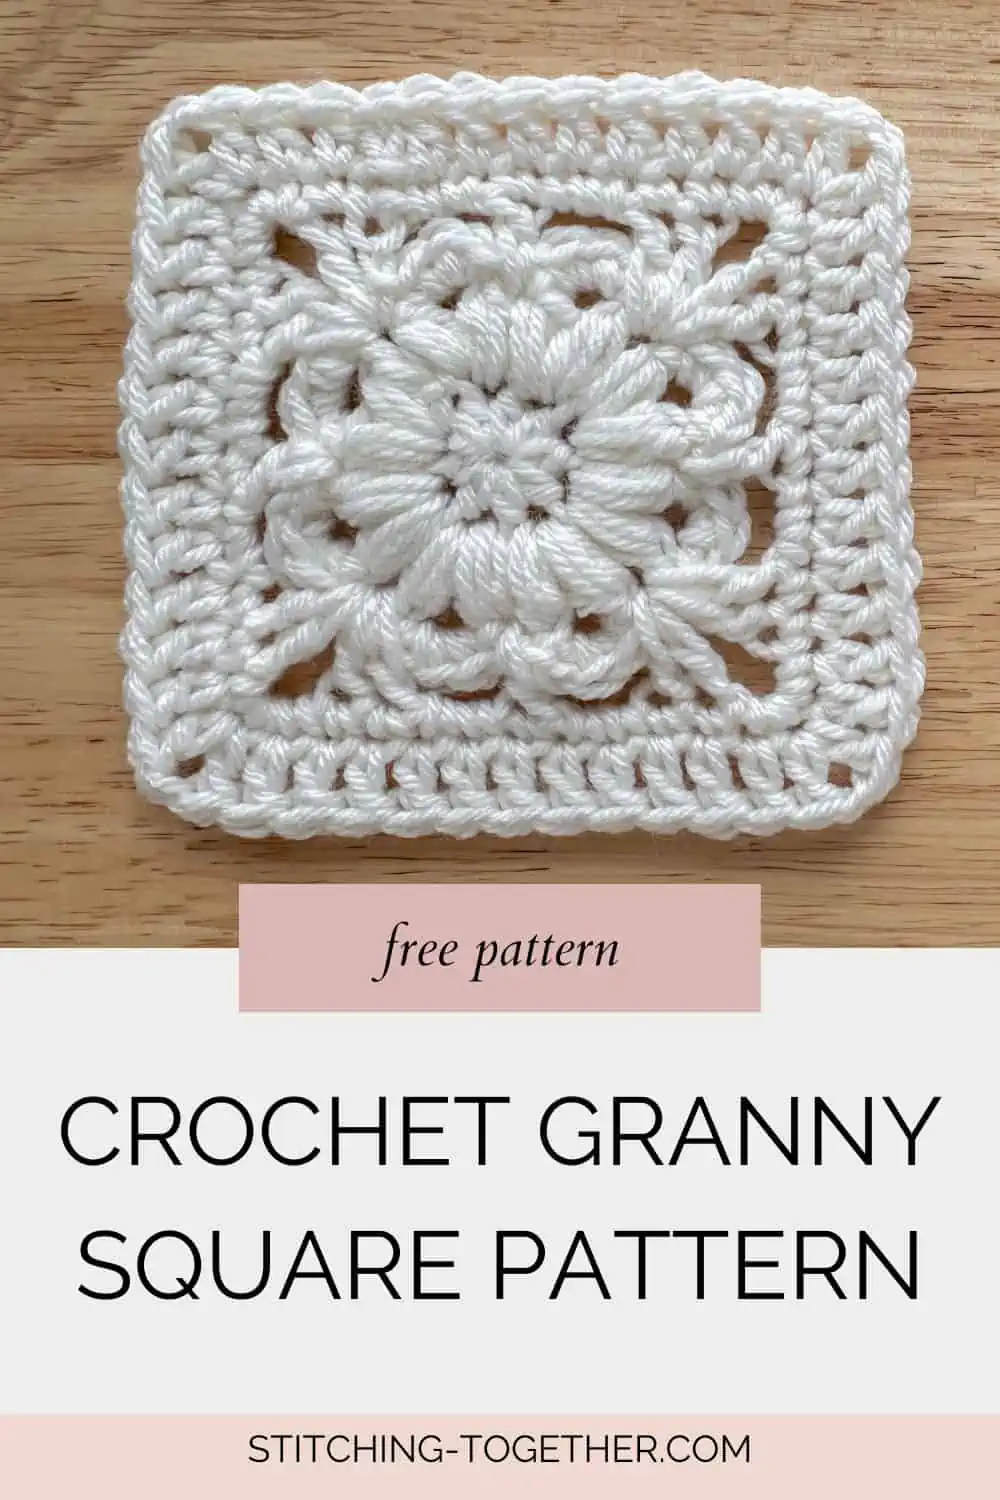 white crochet flower granny square with text overlay reading "free pattern crochet granny square pattern"